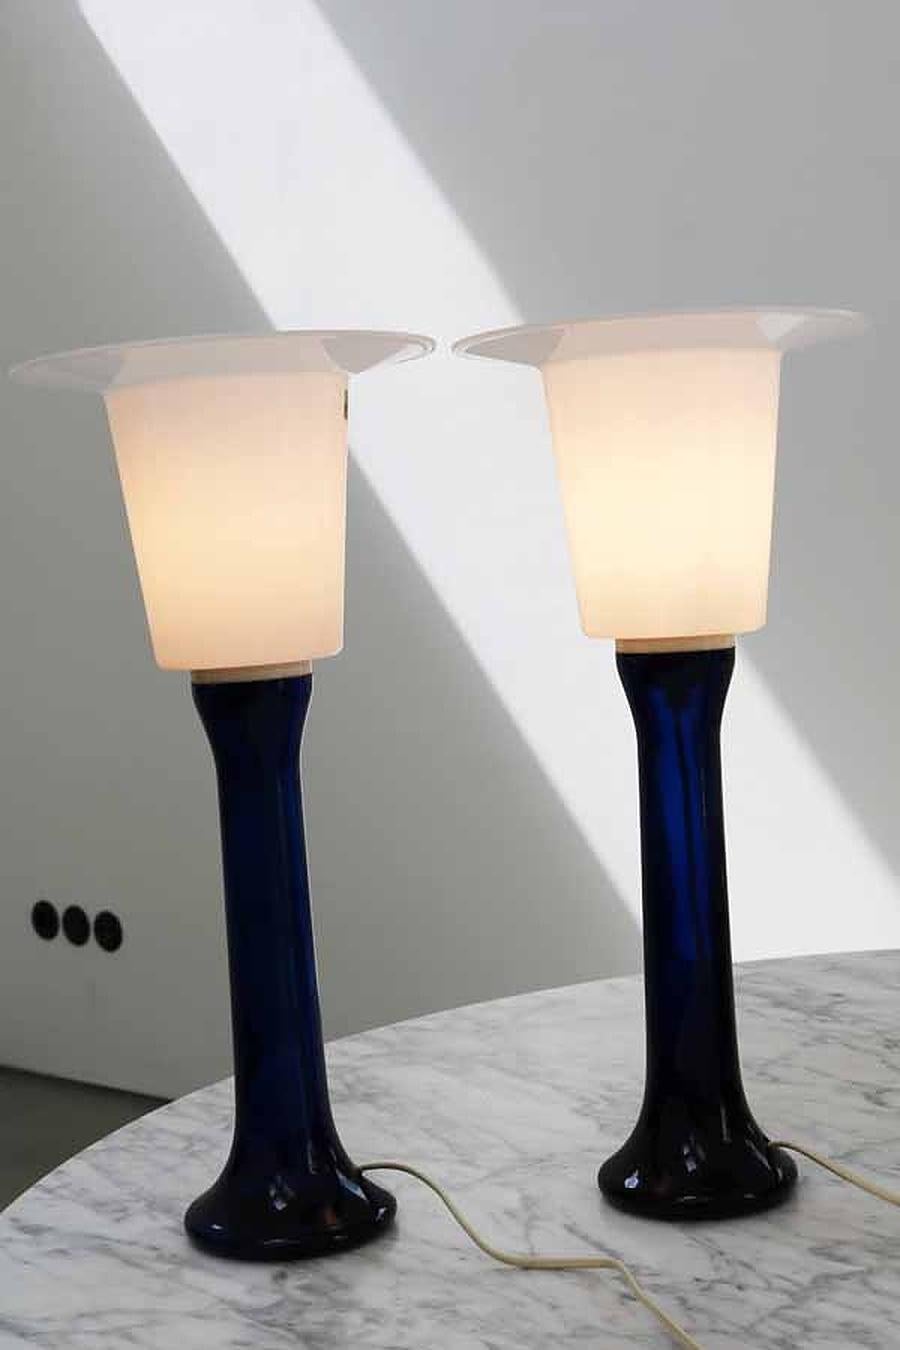 Swedish Pair of 2 Rare Glass Table Lamps by Uno & Östen Kristiansson, Sweden For Sale